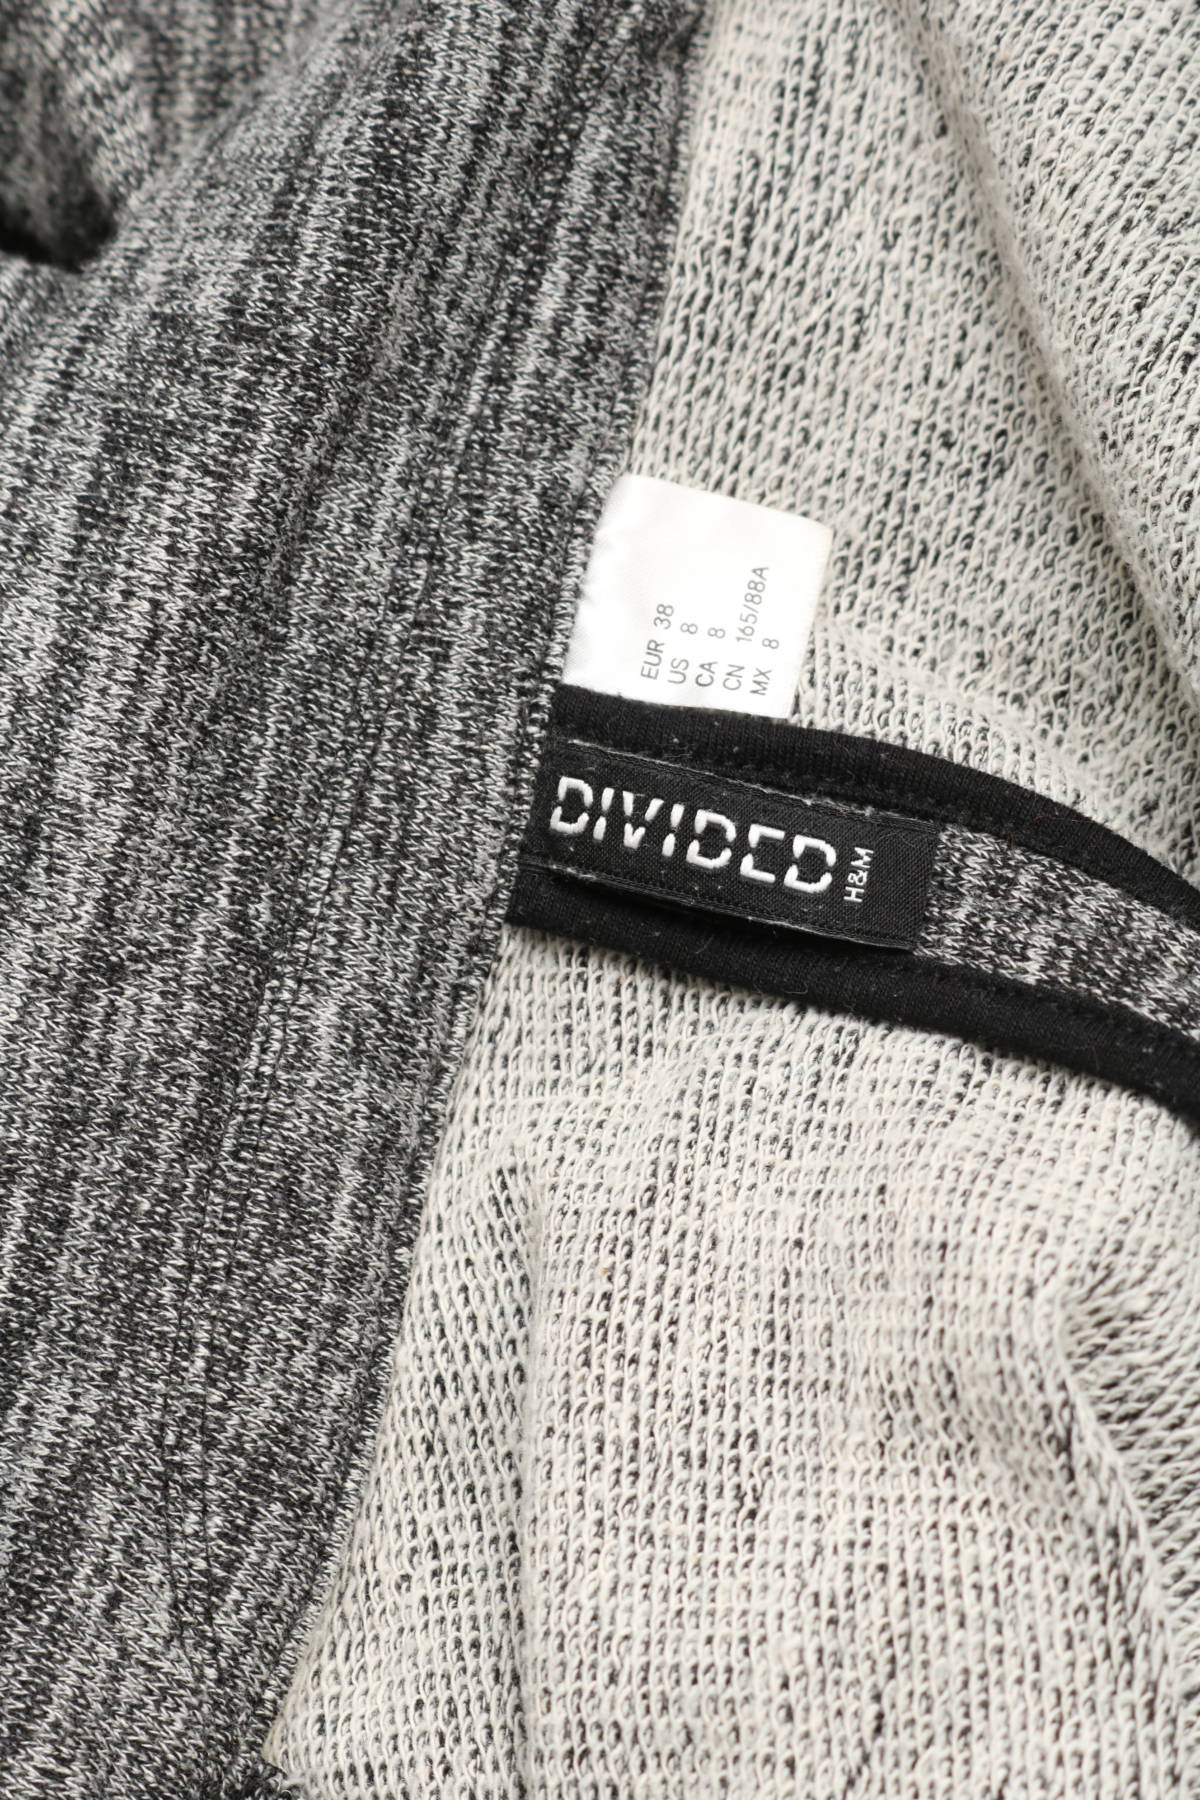 Сако H&M DIVIDED3